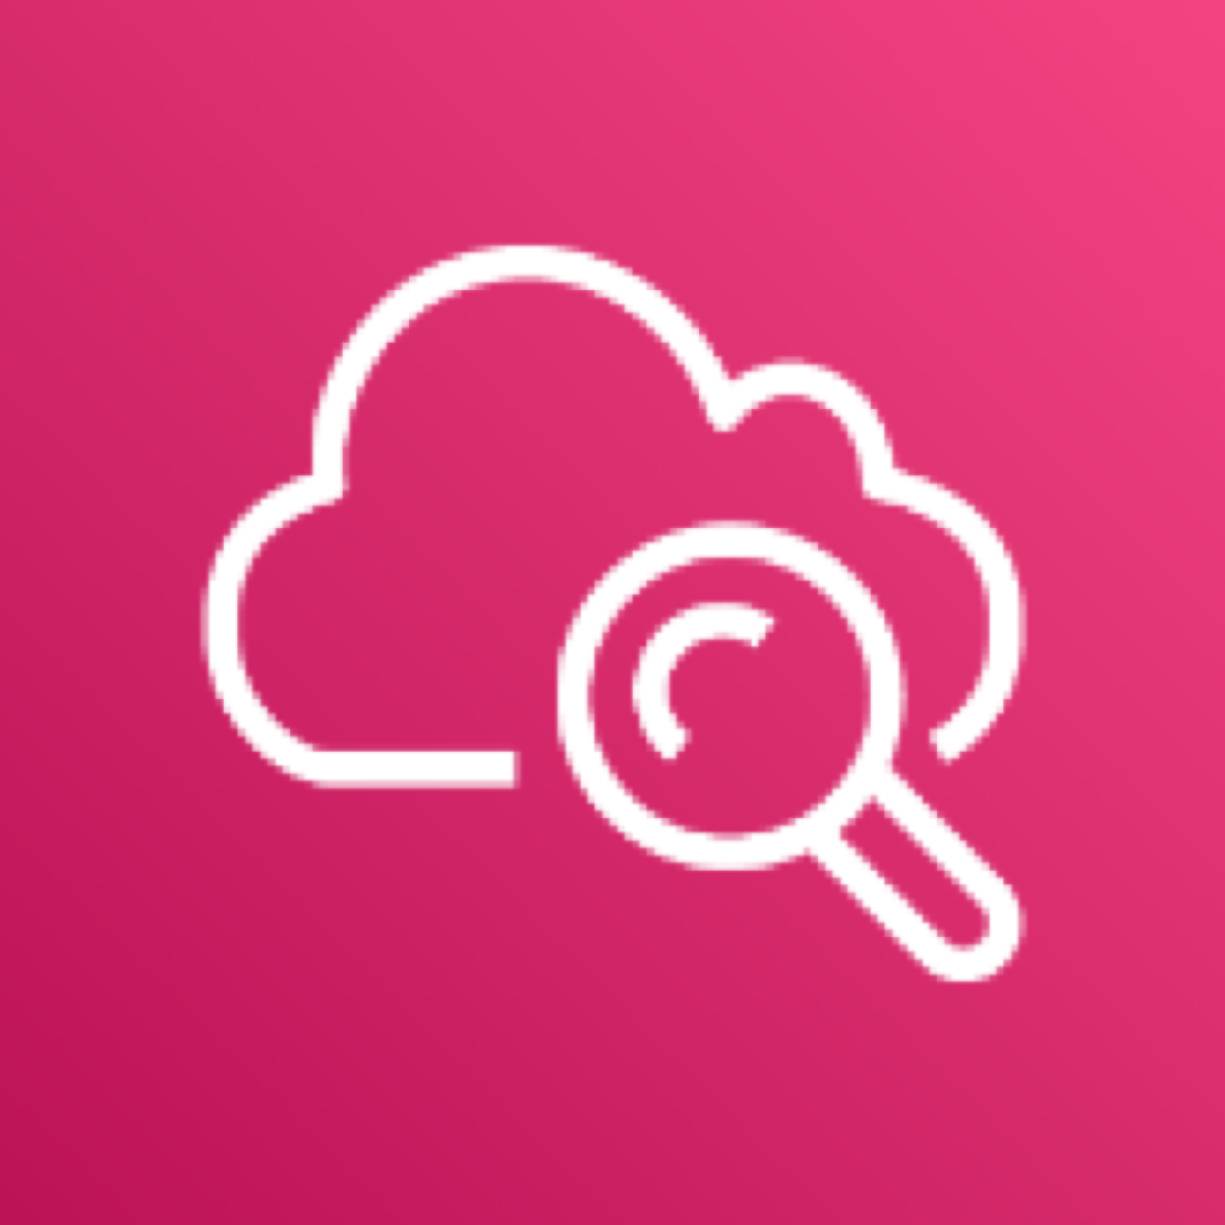 Amazon CloudWatch icon depicting a cloud being inspected by a magnifying glass against a pink background